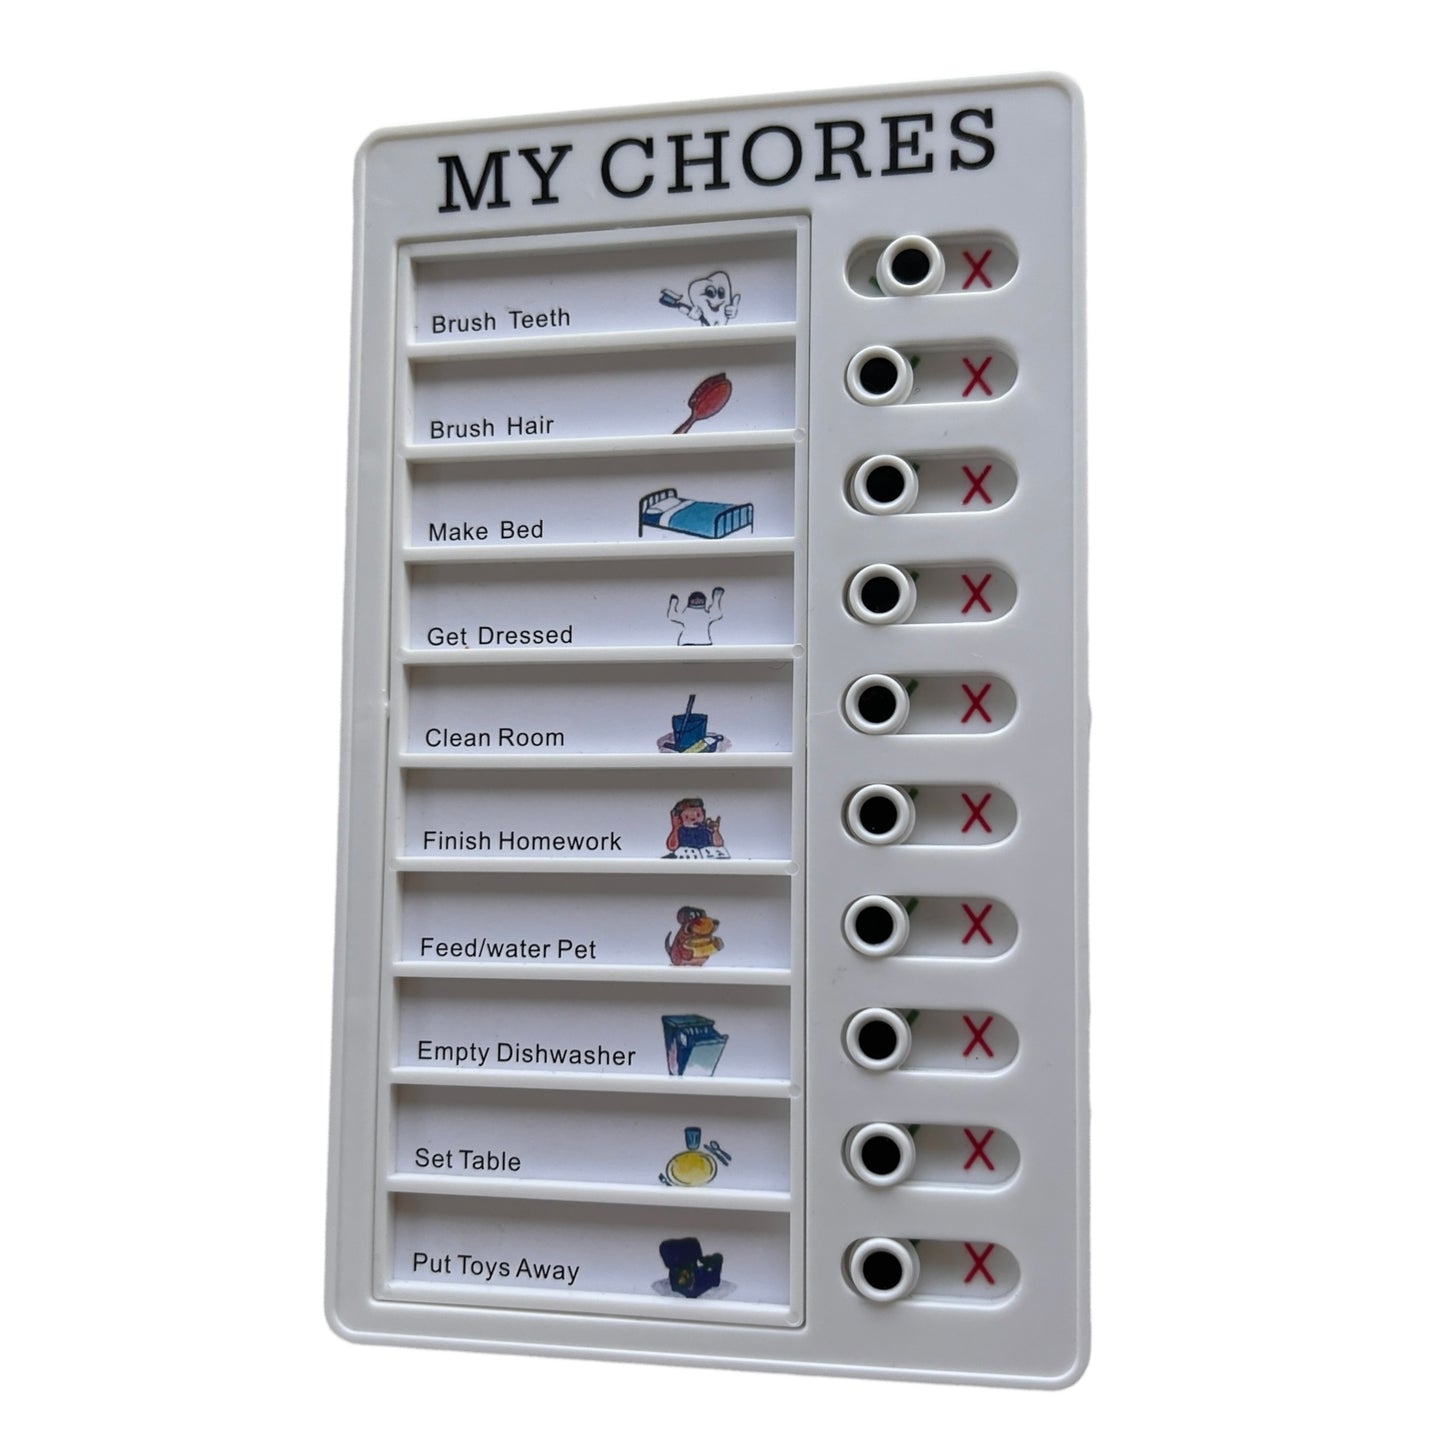 💰🎨 Reusable Daily Chores Chart  SPIRIT SPARKPLUGS   